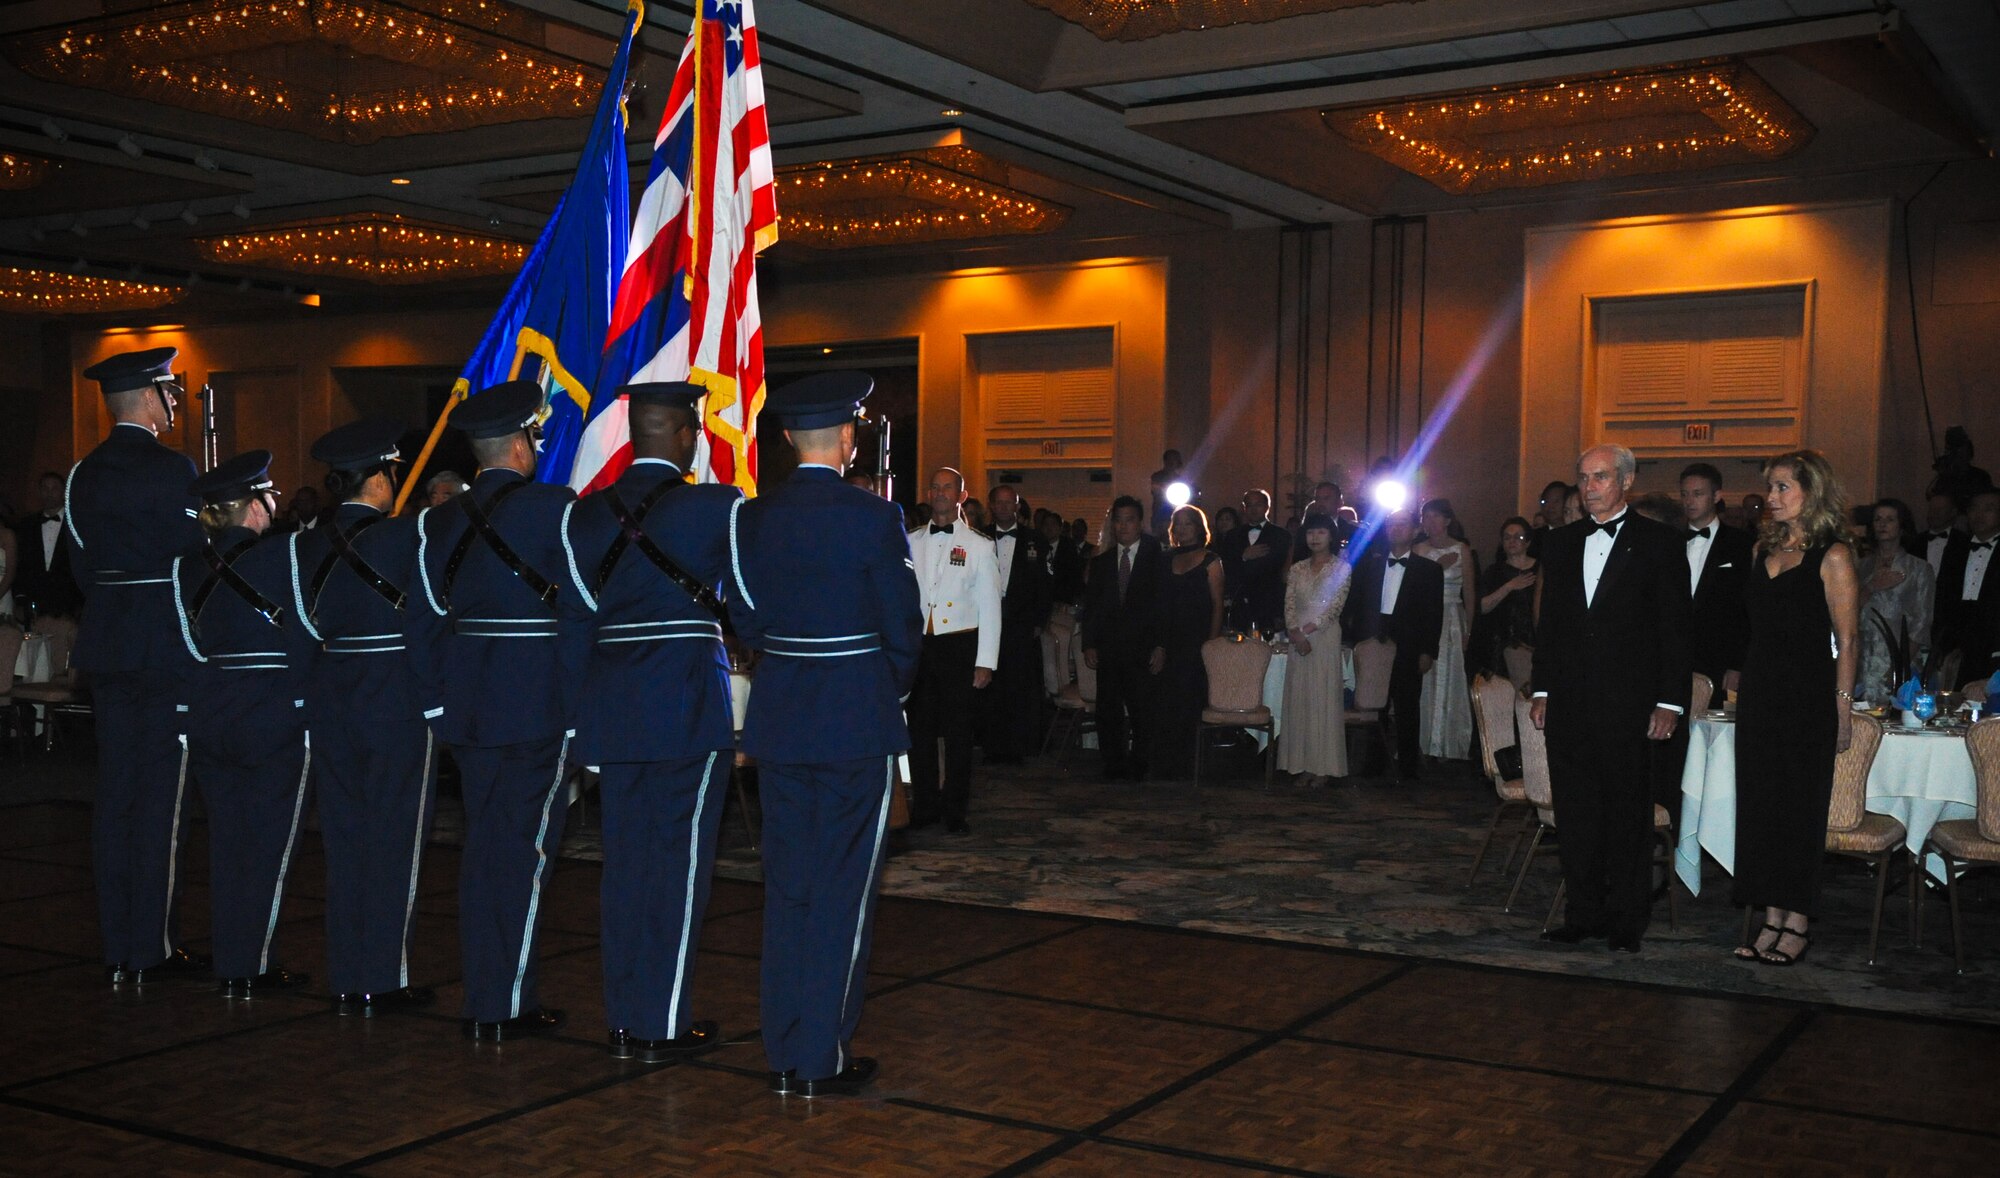 Joint Base Pearl Harbor-Hickam Honor Guard presents the colors at the 64th annual Air Force Ball, held at the Hilton Hawaiian Village in Waikiki, Sept. 16. The theme, 'A tribute to heroes,' paid homage to Airmen throughout the decades. The guest of honor, Senior Airman Brian Kolfage, is a triple amputee from Operation Iraqi Freedom. When introduced, and after a slide show of his story played, Kolfage recieved a standing ovation for his service. (U.S. Air Force photo/Senior Airman Lauren Main)
